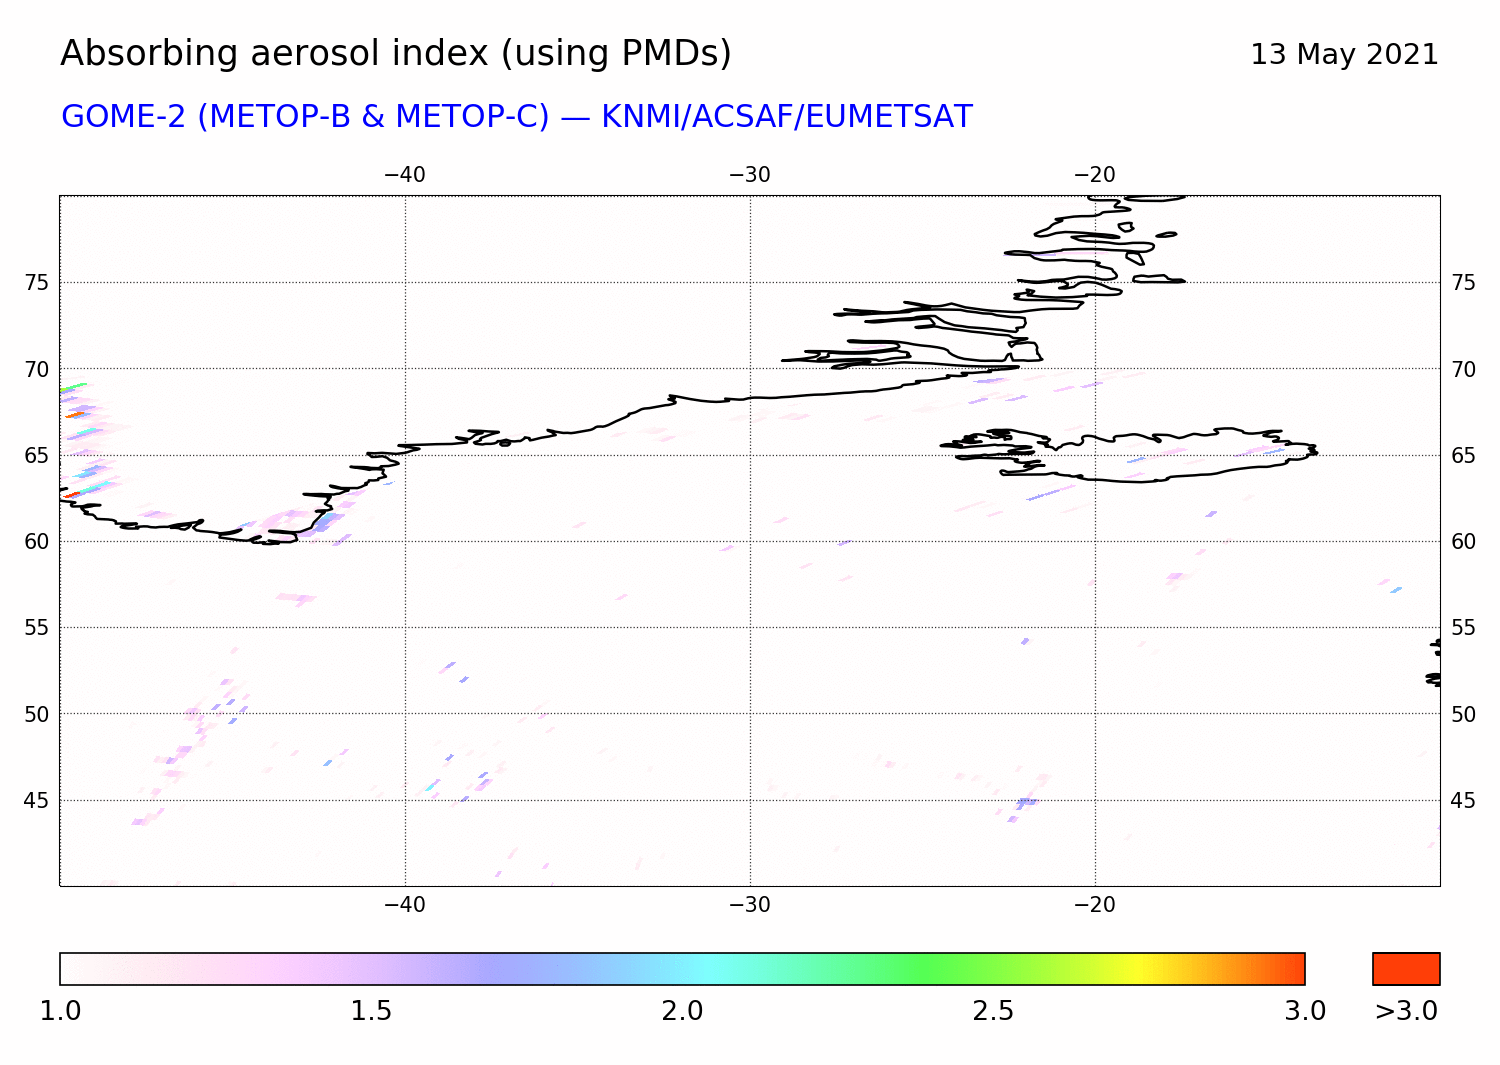 GOME-2 - Absorbing aerosol index of 13 May 2021